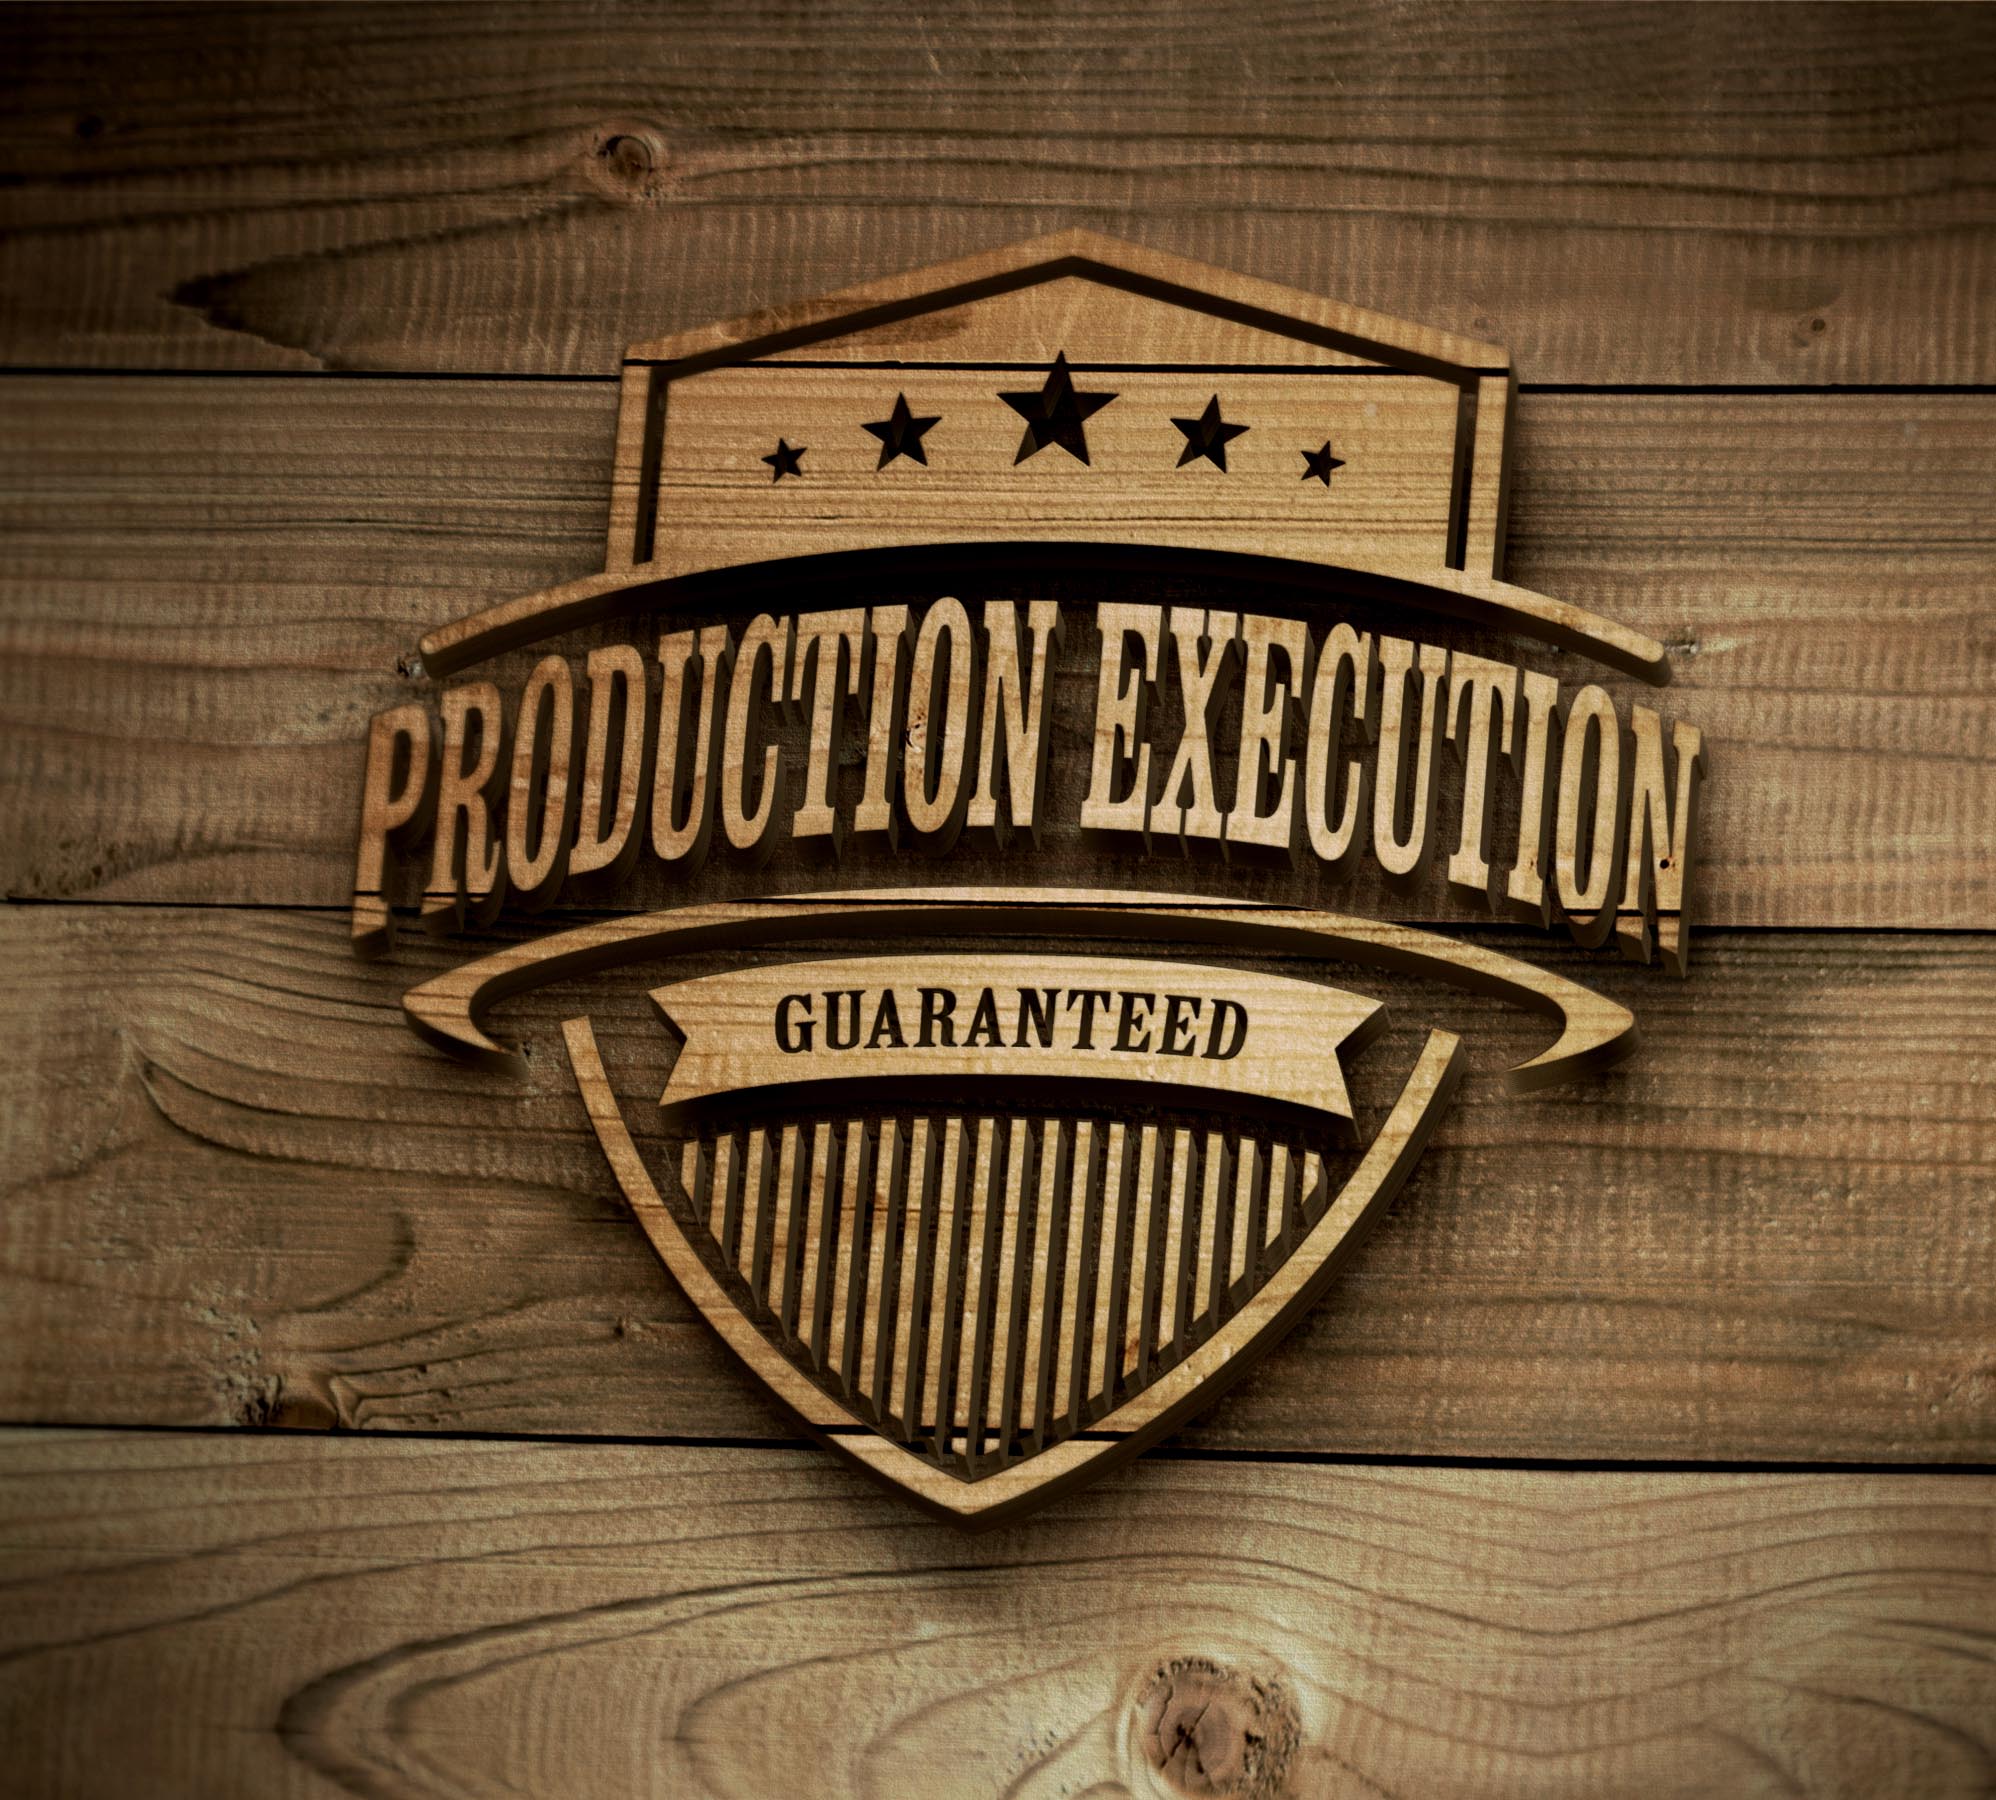 Production Execution